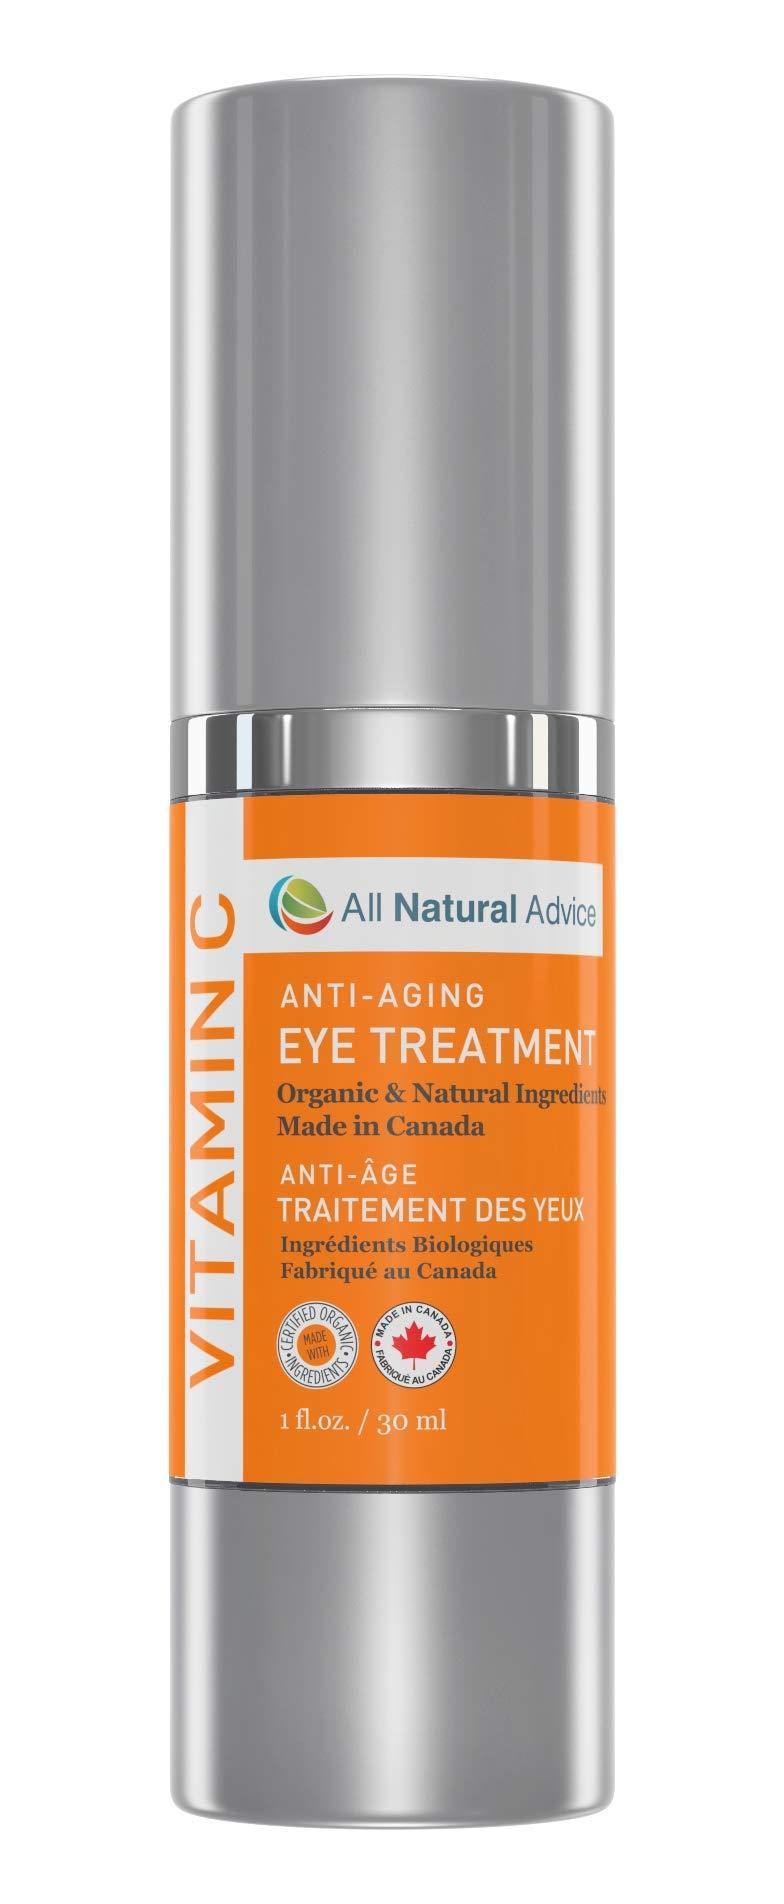 [Australia] - All Natural Advice Vitamin C Anti Aging Eye Treatment – Gentle & Effective Treatment for Delicate Eye Area to Revitalize Skin. 